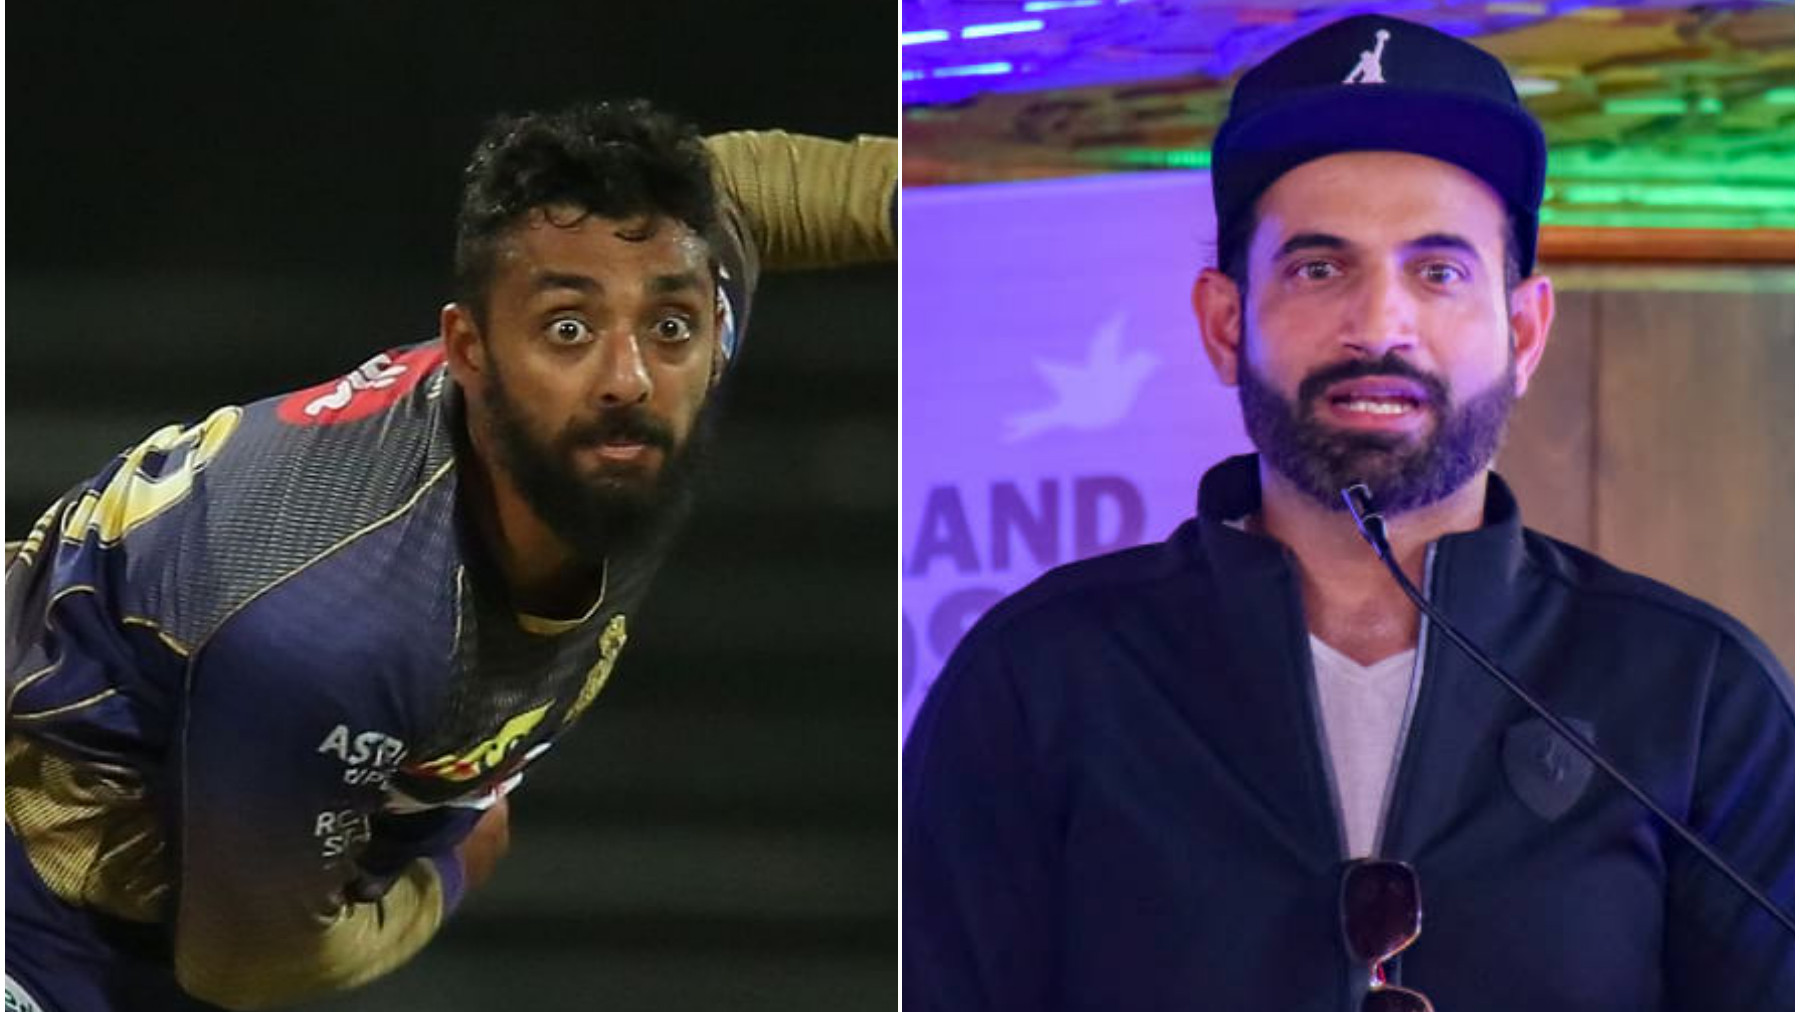 T20 World Cup 2021: Varun Chakravarthy can be a huge X-factor for India- Irfan Pathan